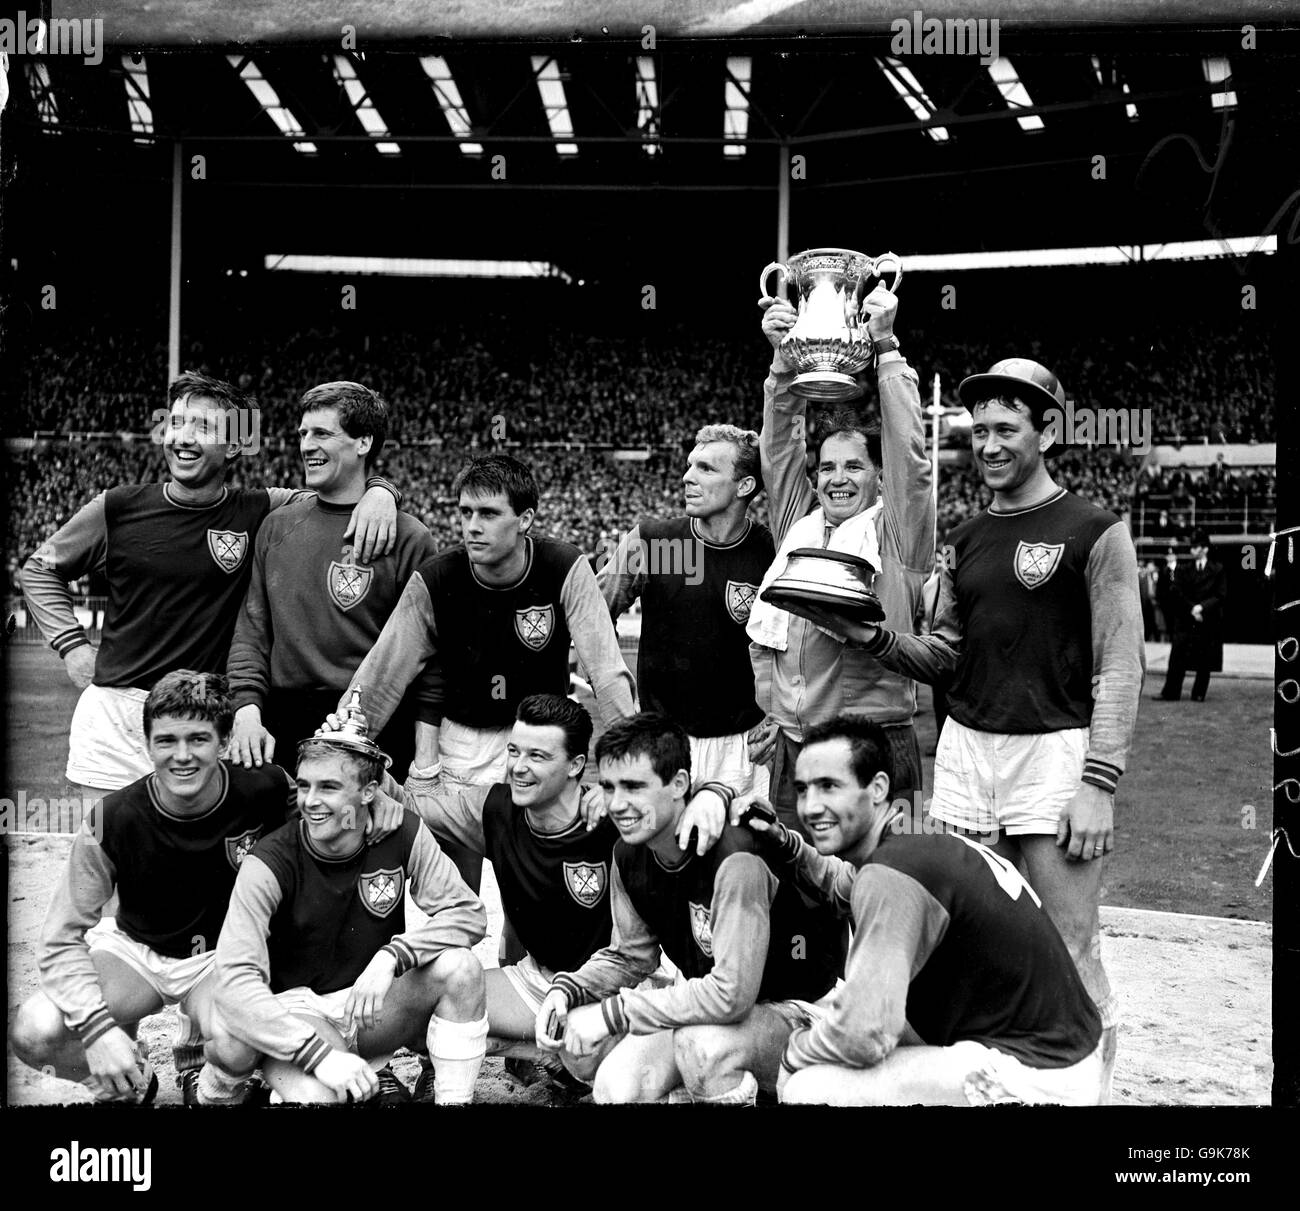 West Ham United celebrate with the FA Cup after their 3-2 victory: (back row, l-r) John Bond, Jim Standen, Geoff Hurst, Bobby Moore, ?, Ken Brown (front row, l-r) Jack Burkett, John Sissons, Johnny Byrne, Ronnie Boyce, Eddie Bovington Stock Photo